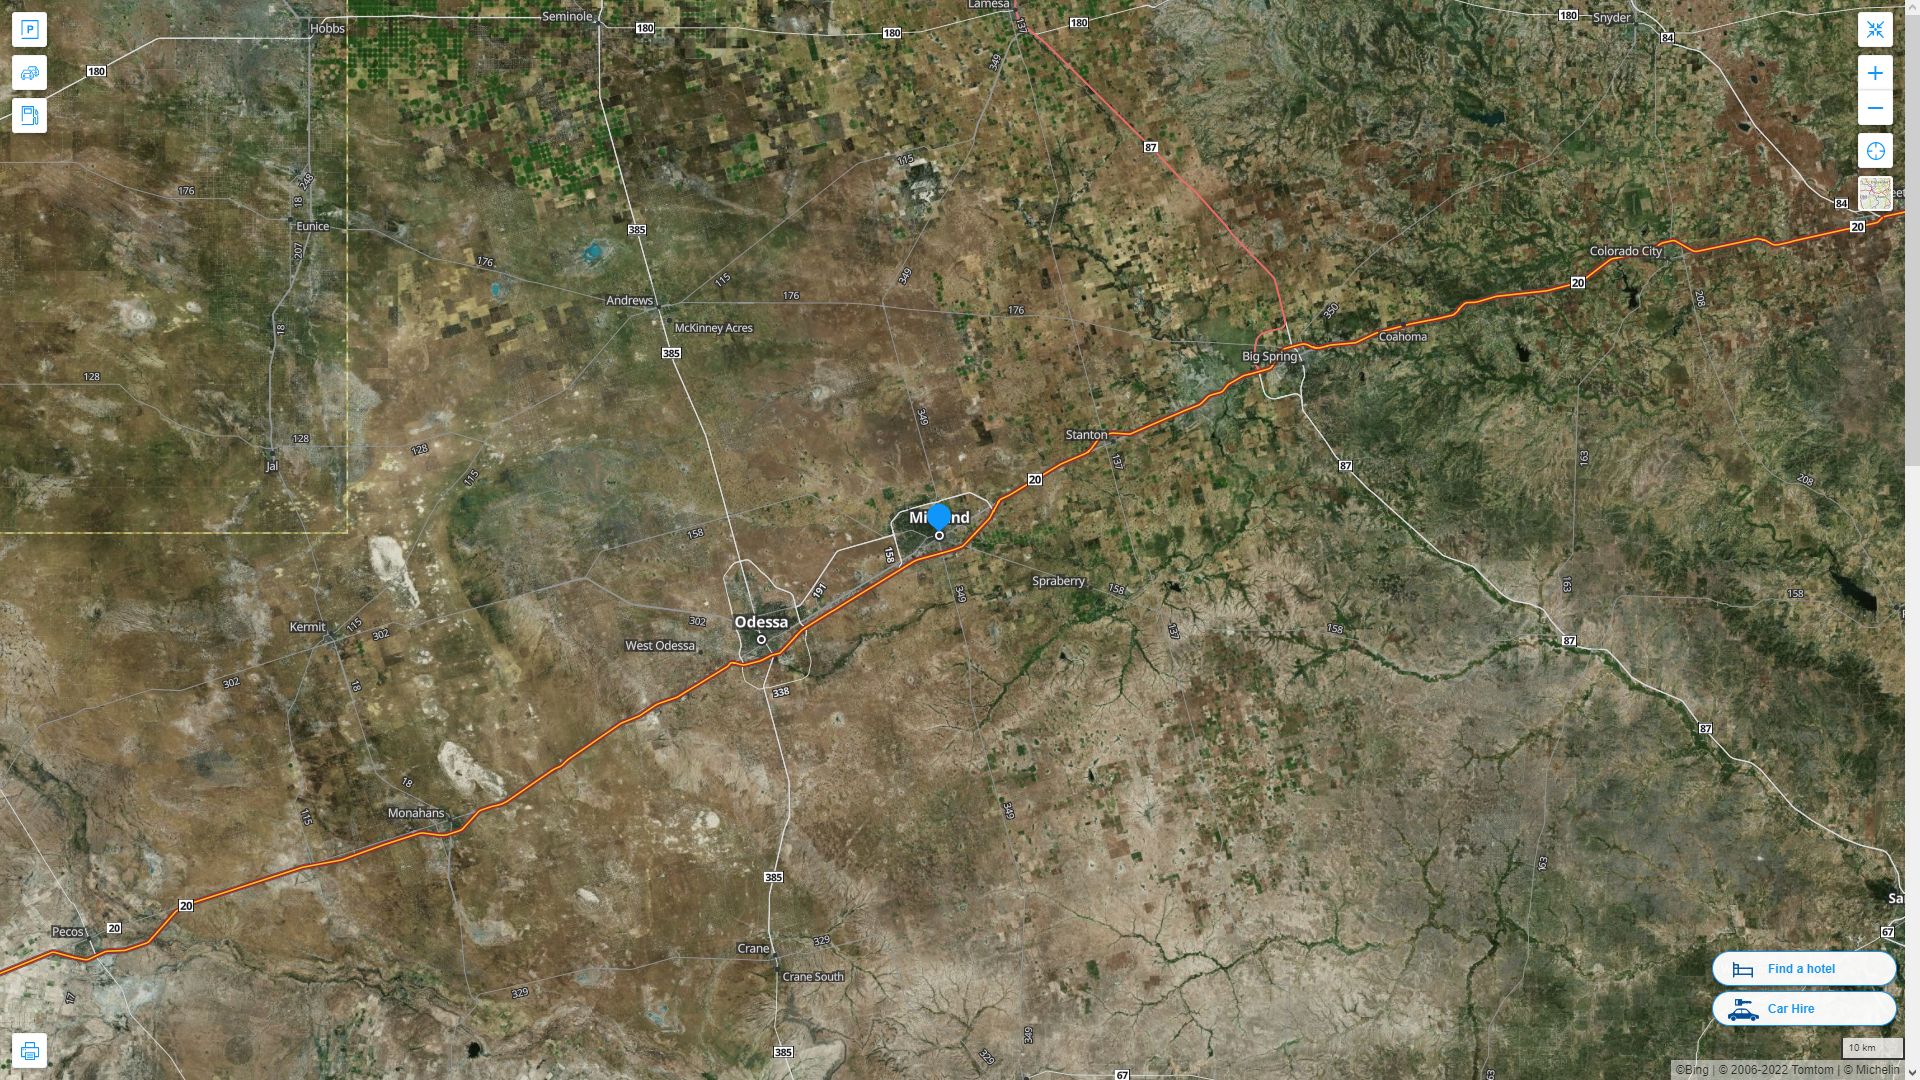 Midland Texas Highway and Road Map with Satellite View